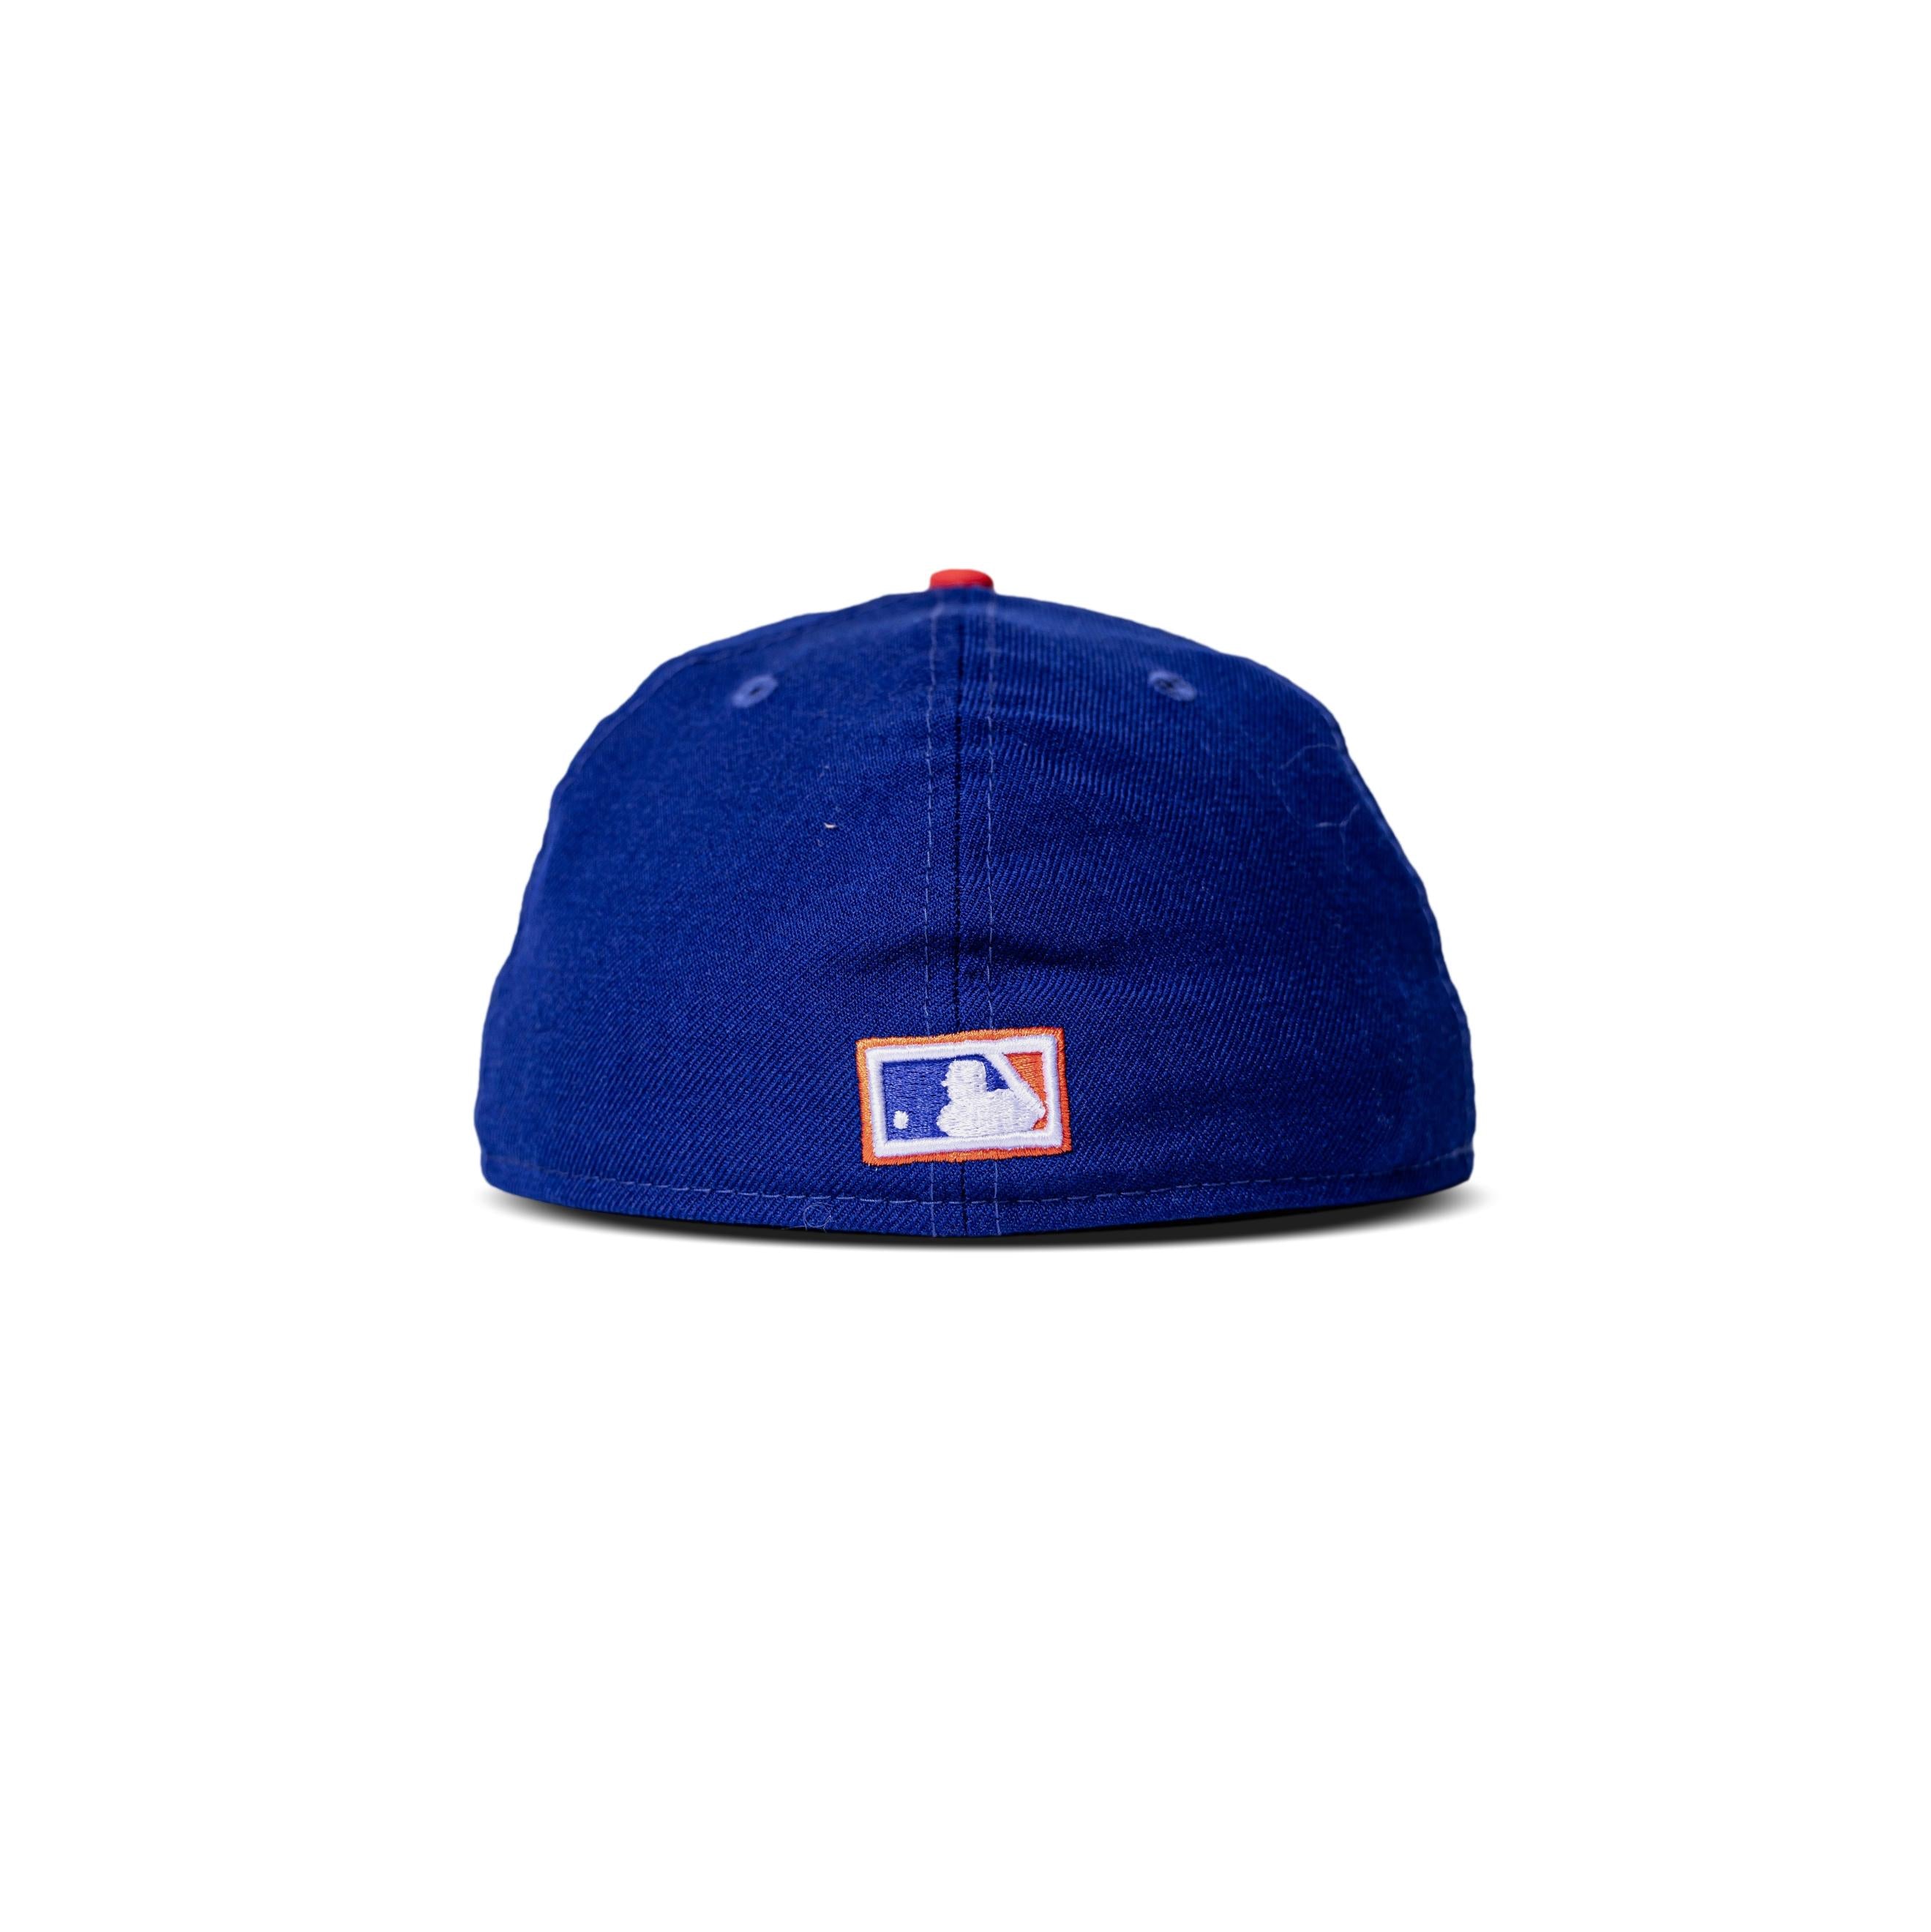 New Era New York Mets Wool Fitted